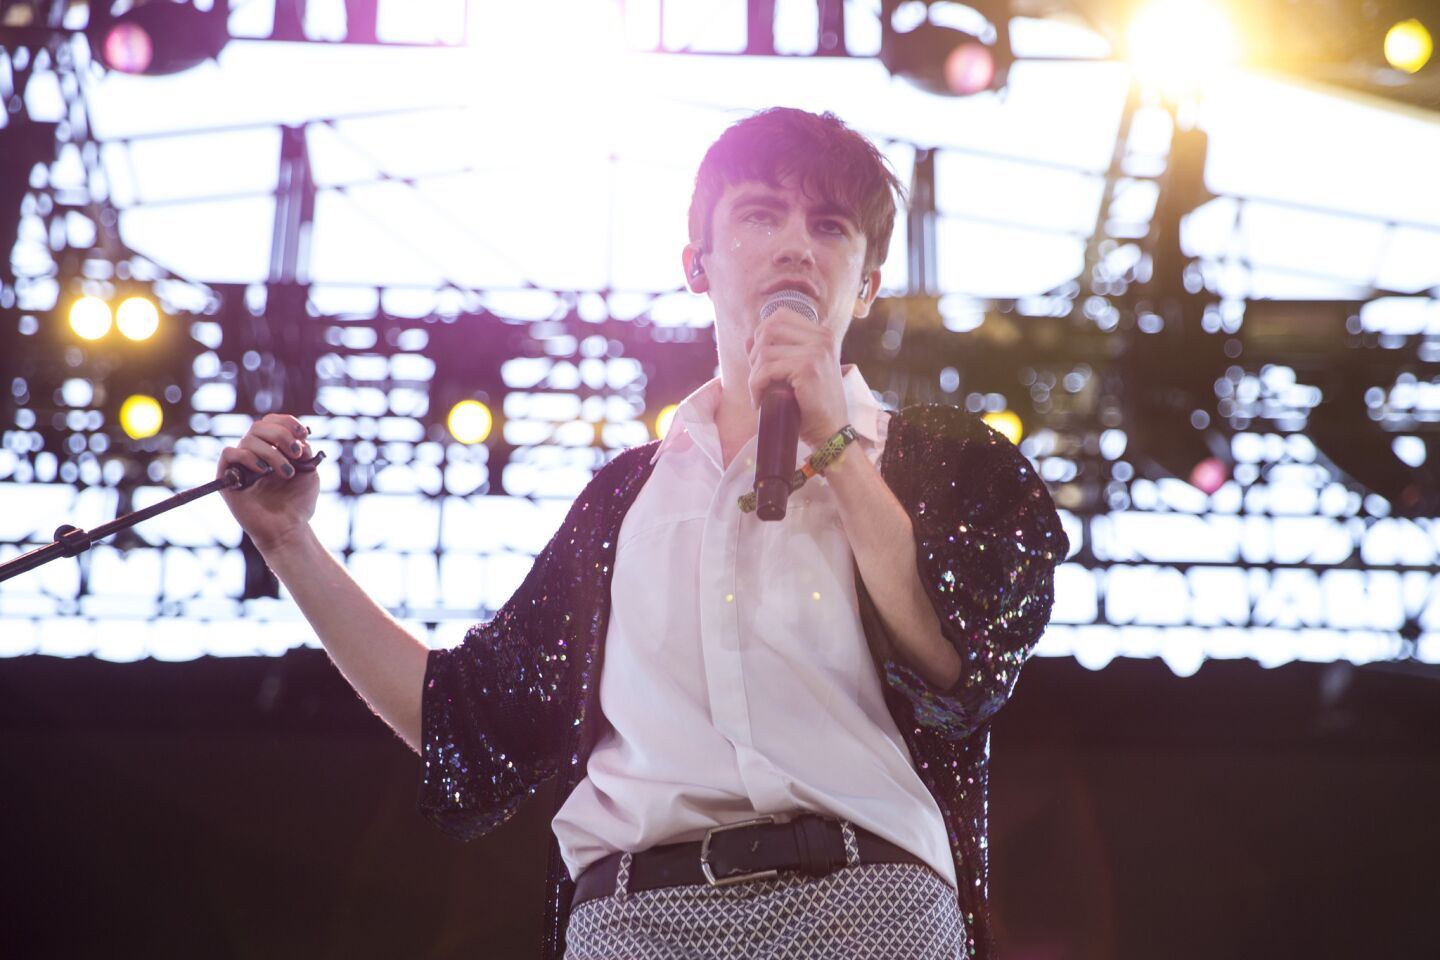 Declan McKenna performs at the Mojave stage during Day 2 of the Coachella Valley Arts and Music Festival on April 14.